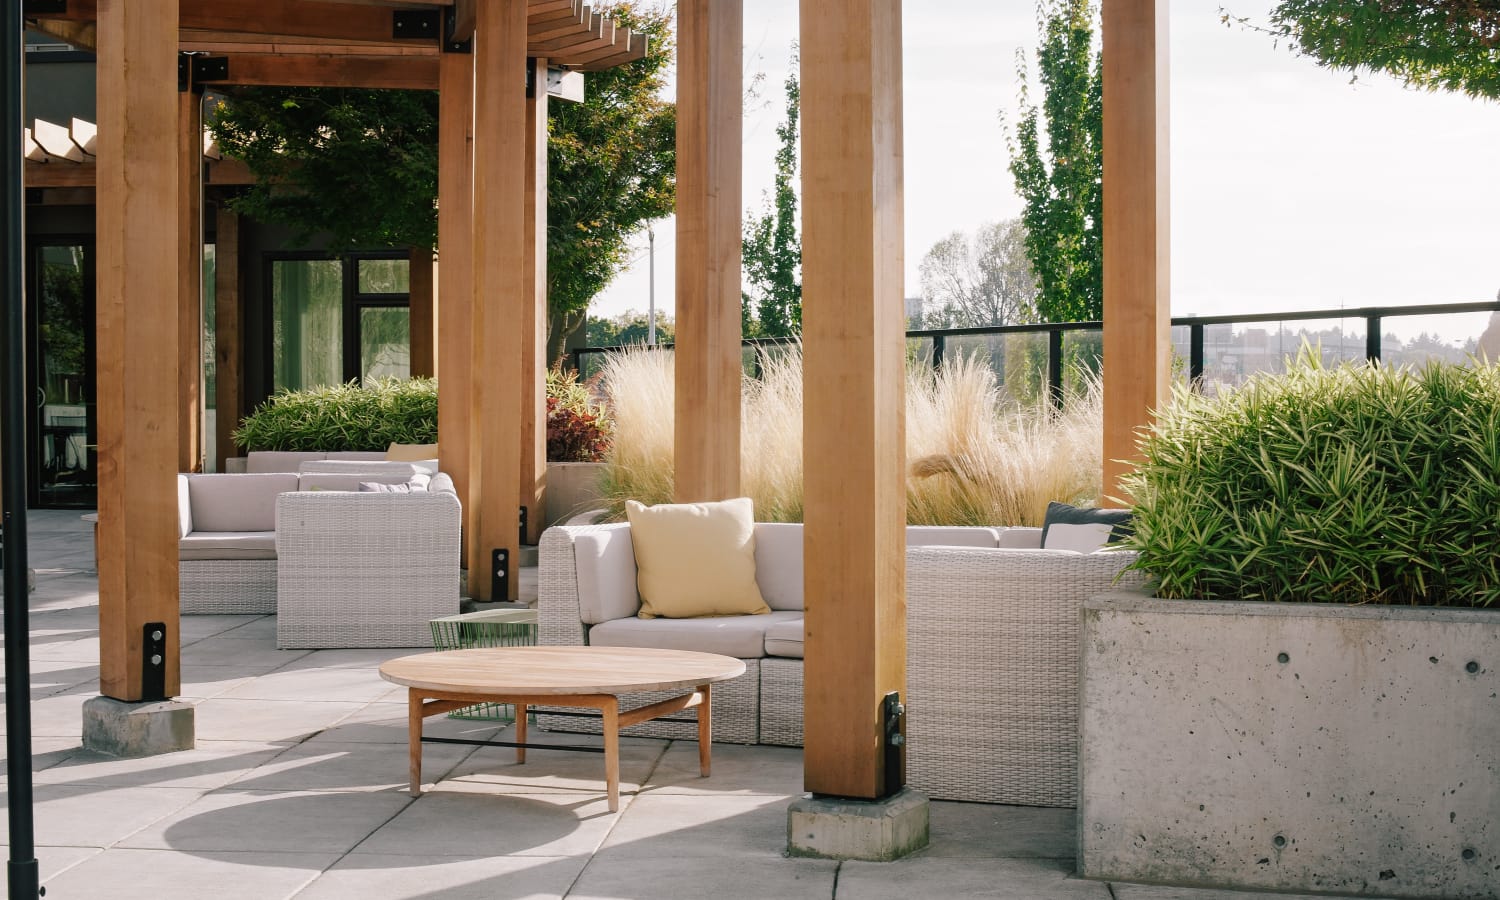 Beautifully designed outside common area at Grant Park Village in Portland, OR